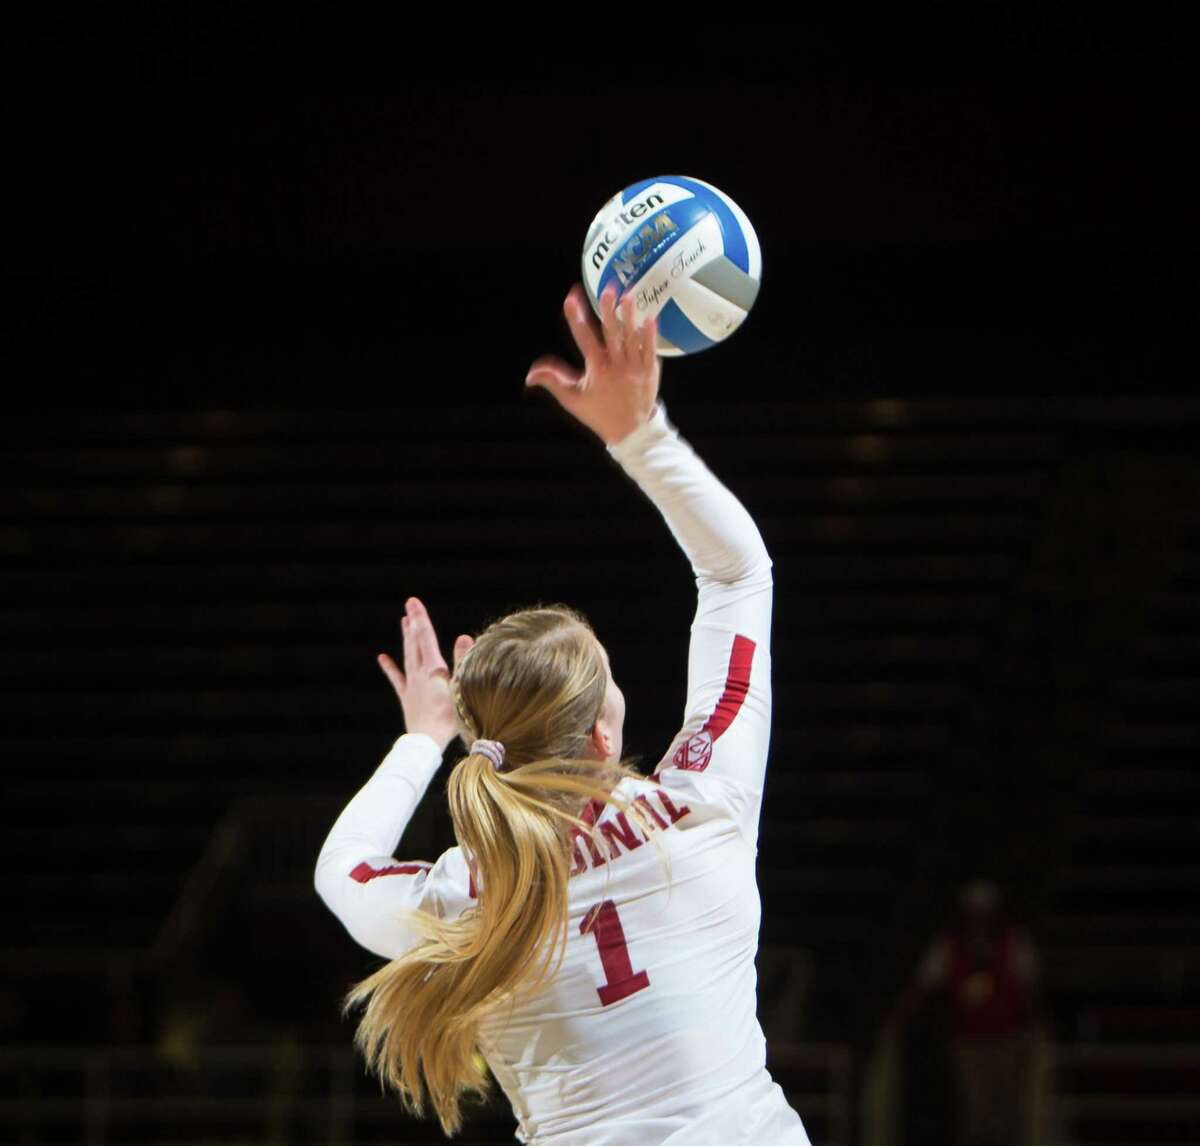 Stanford’s Jenna Gray blends volleyball and javelin seamlessly